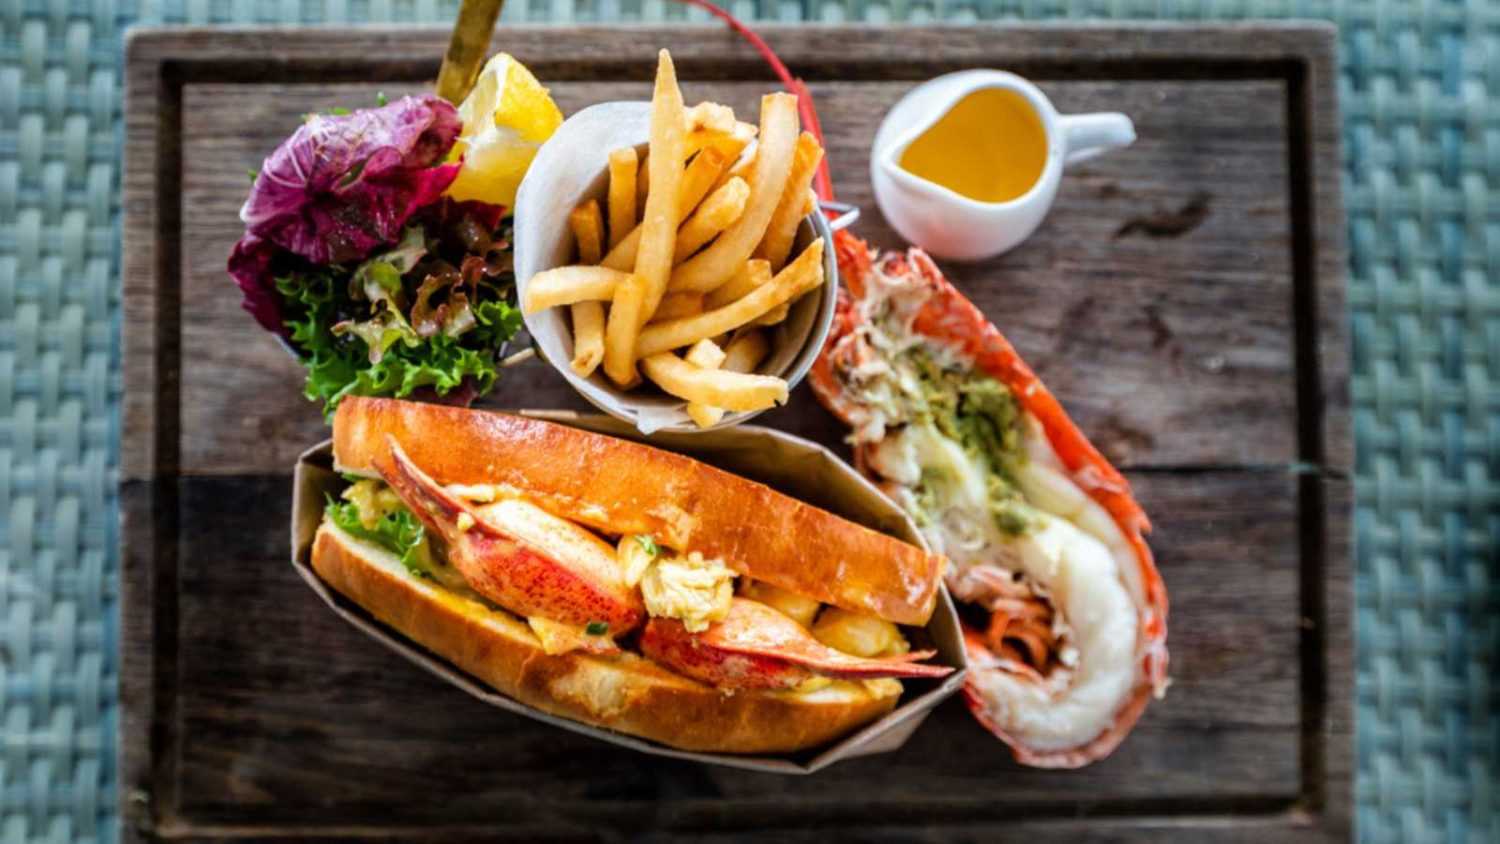 Delicious lobster roll sandwich Served with a side of French Fries and fresh salad. New England lobster roll